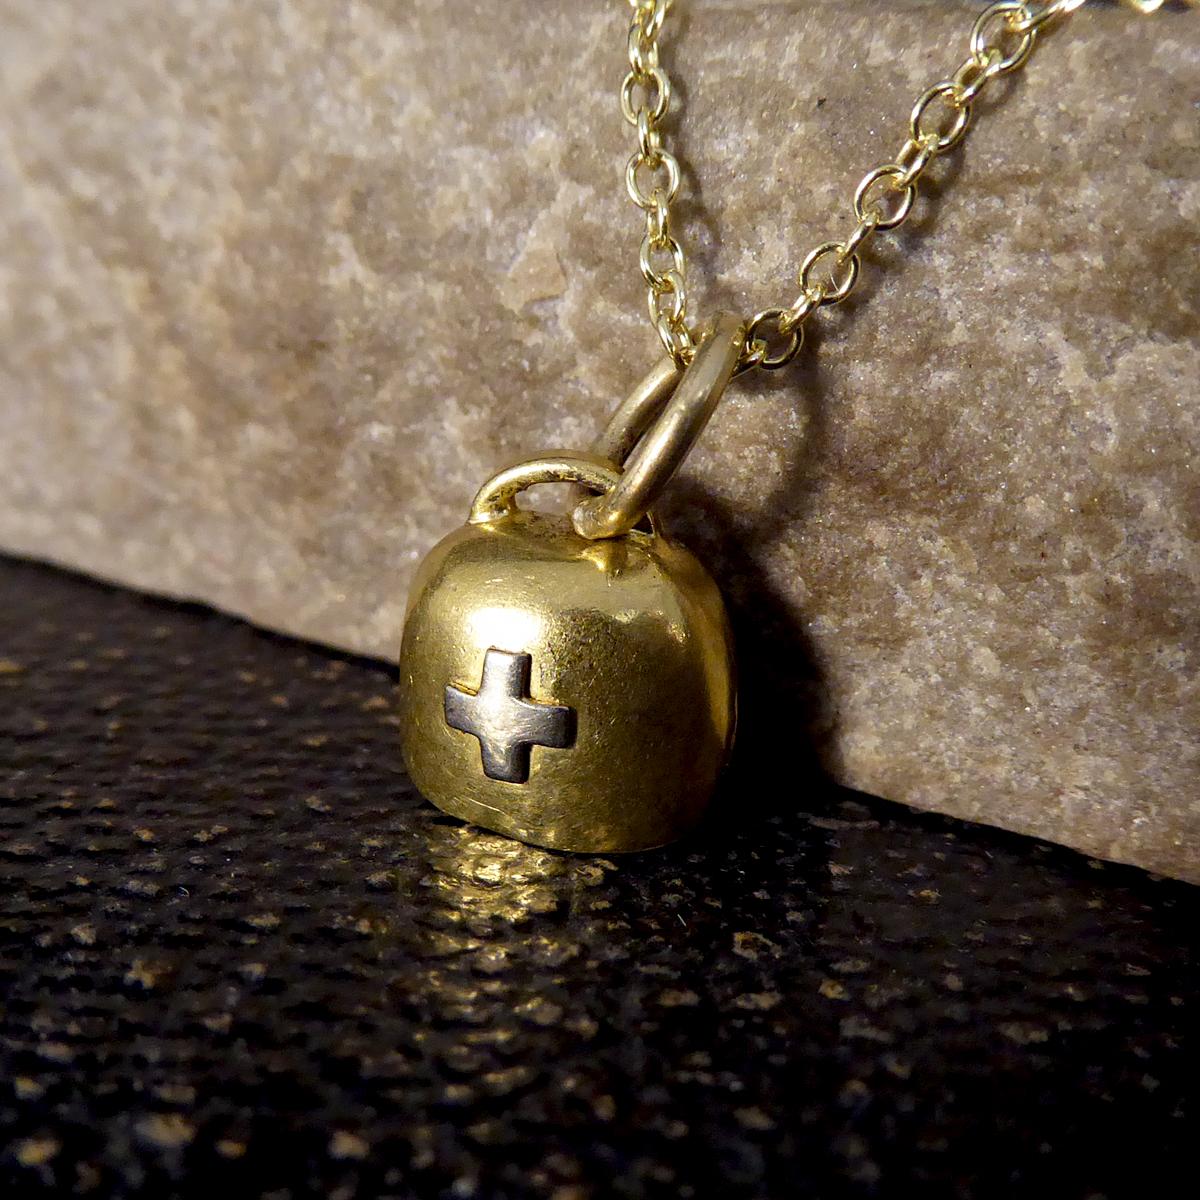 This lovely little antique charm was crafted with care in the 1930's from 15ct Yellow Gold with a White Gold cross on the front. This Swiss Cow Bell sits beautifully on the neckline on a contemporary 9ct Yellow Gold chain. A dainty and perfect